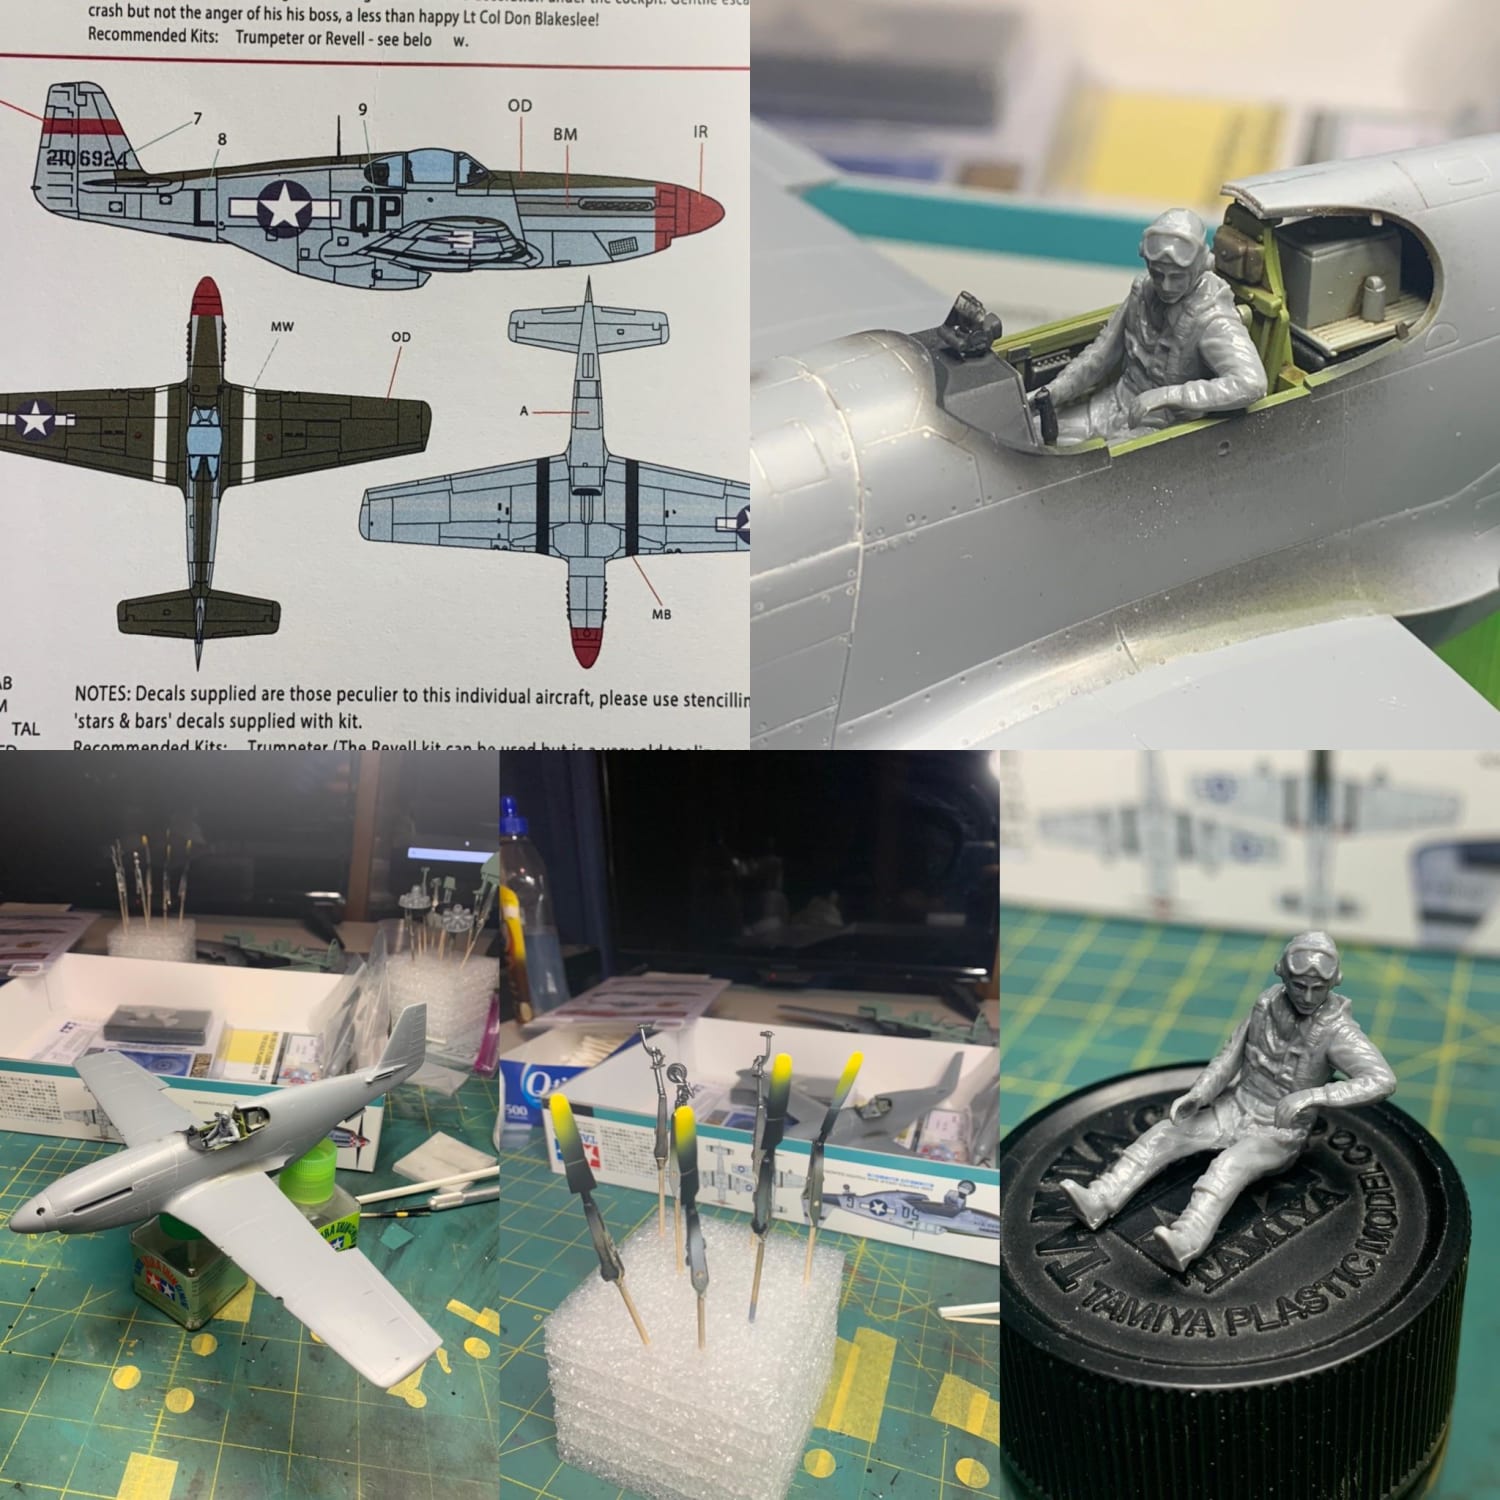 Finally decided on markings. Going for Ralp Kidd Hofer’s . Got the last the Insterior done. Next to start masking the clear parts. Still need to polish the airframe. Also got the Pilot assembled :)